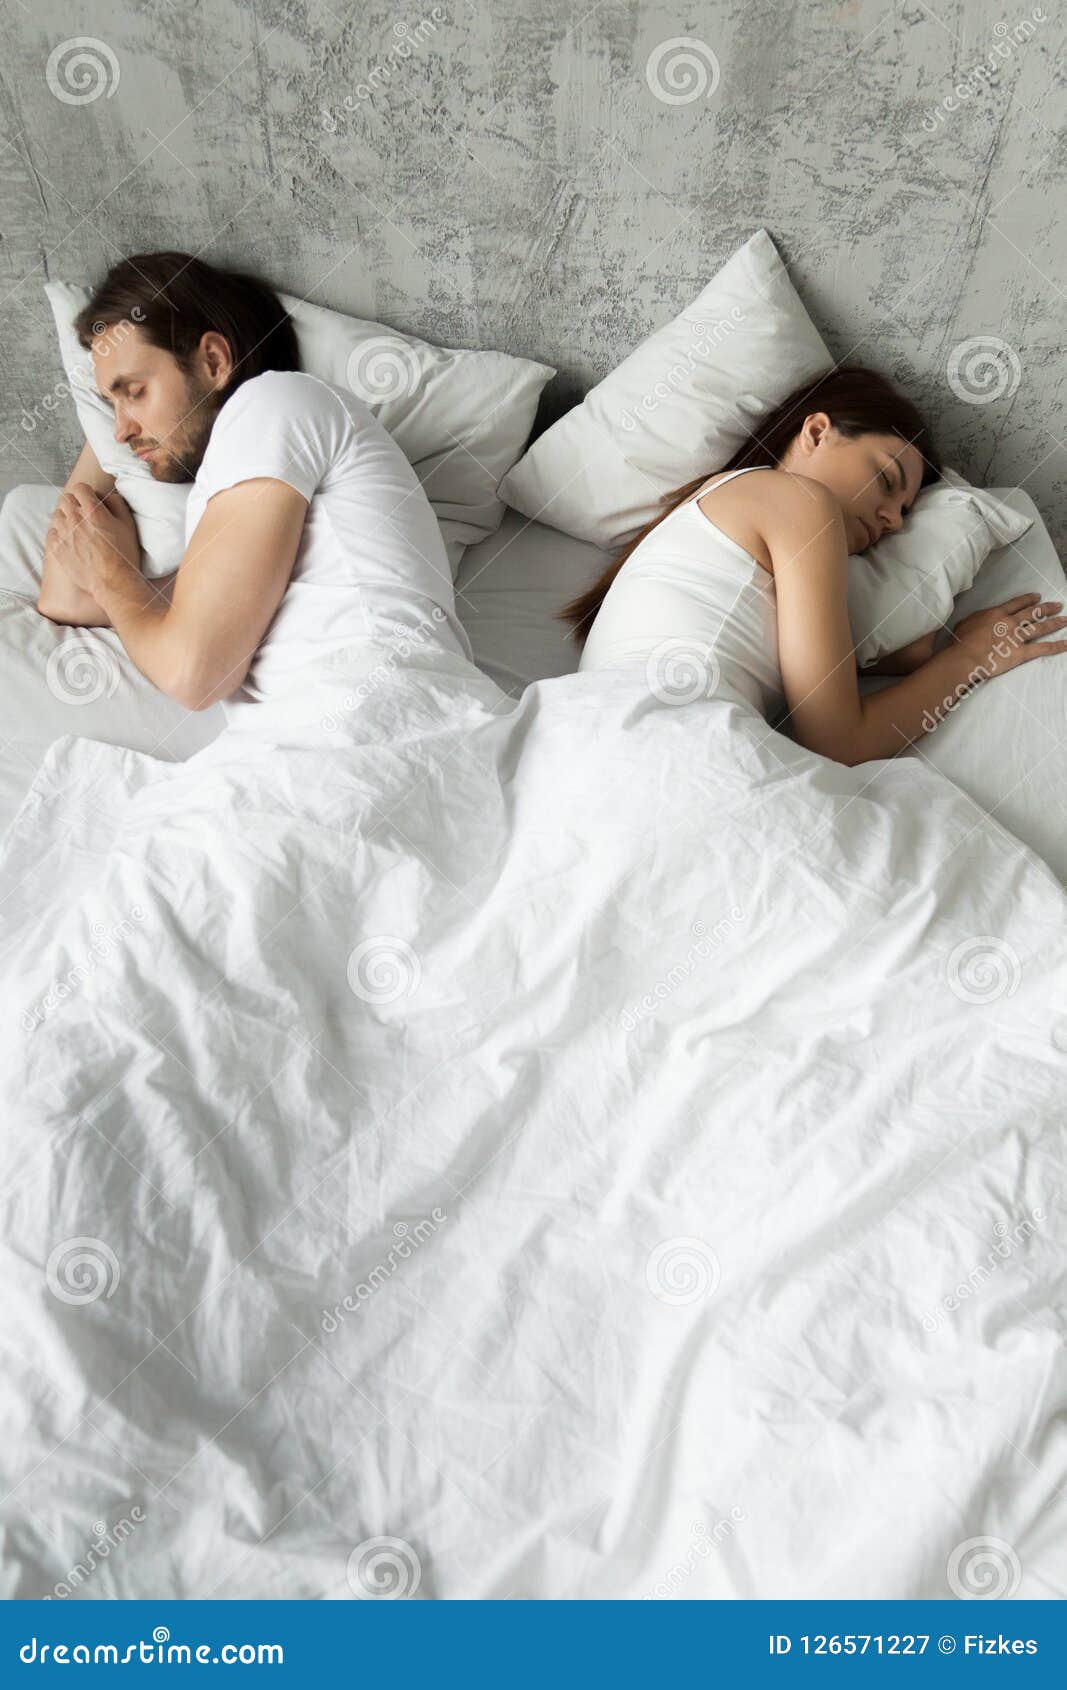 indifferent couple sleep separately avoiding intimacy in bed